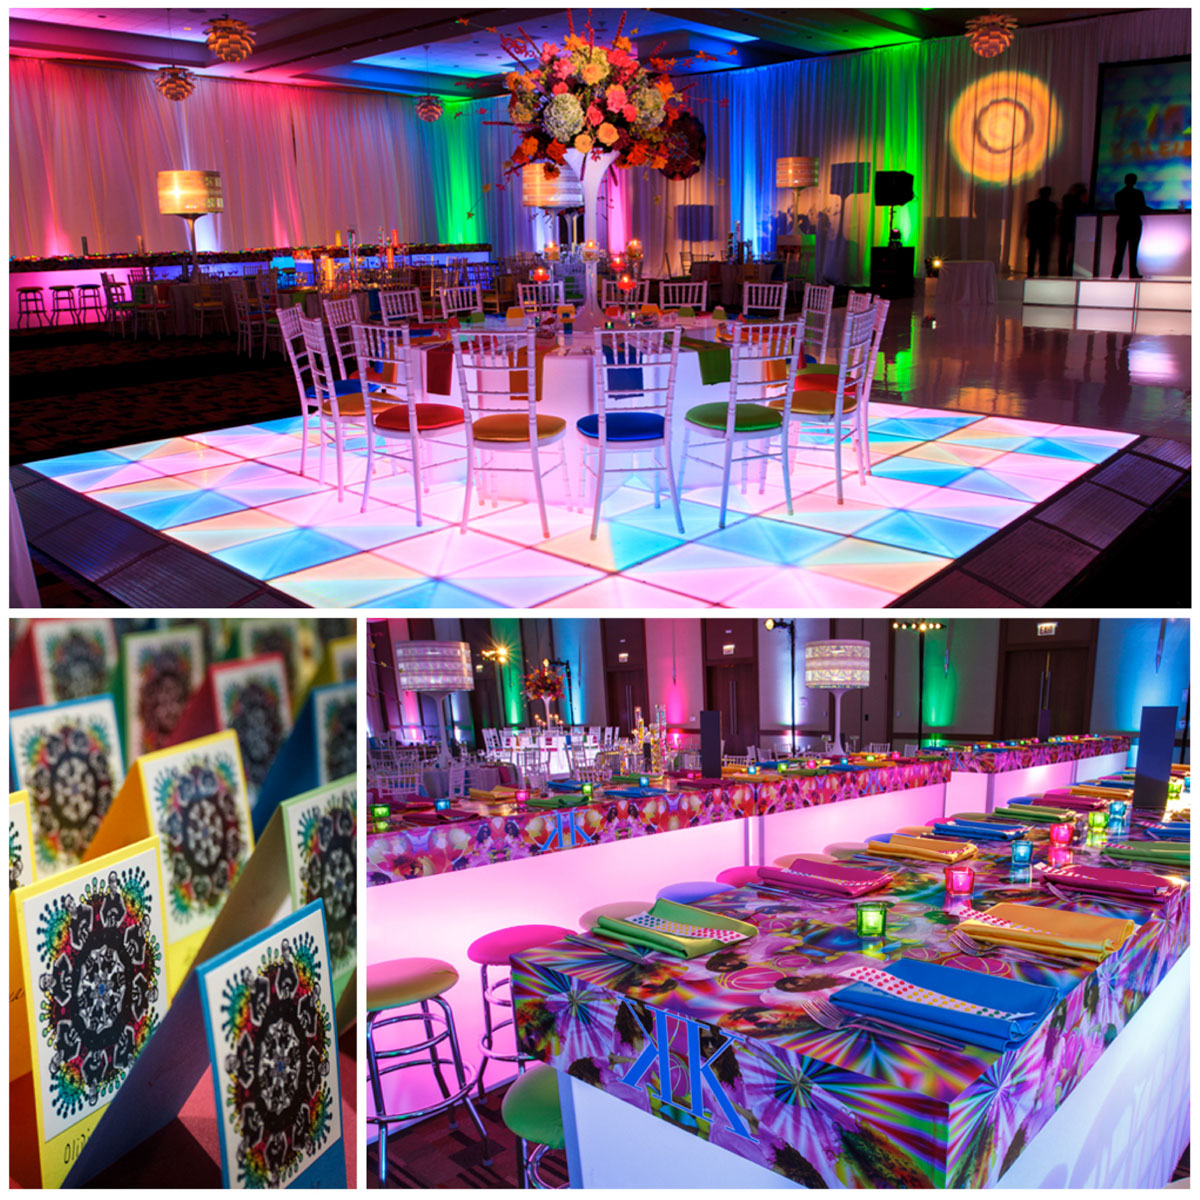 While dreaming up this kaleidoscope party, Vince works closely with the graphics team to create multiple layers of digital art, carrying their theme through every detail including tabletop treatments, spinning lamp shade centerpieces and place card design.